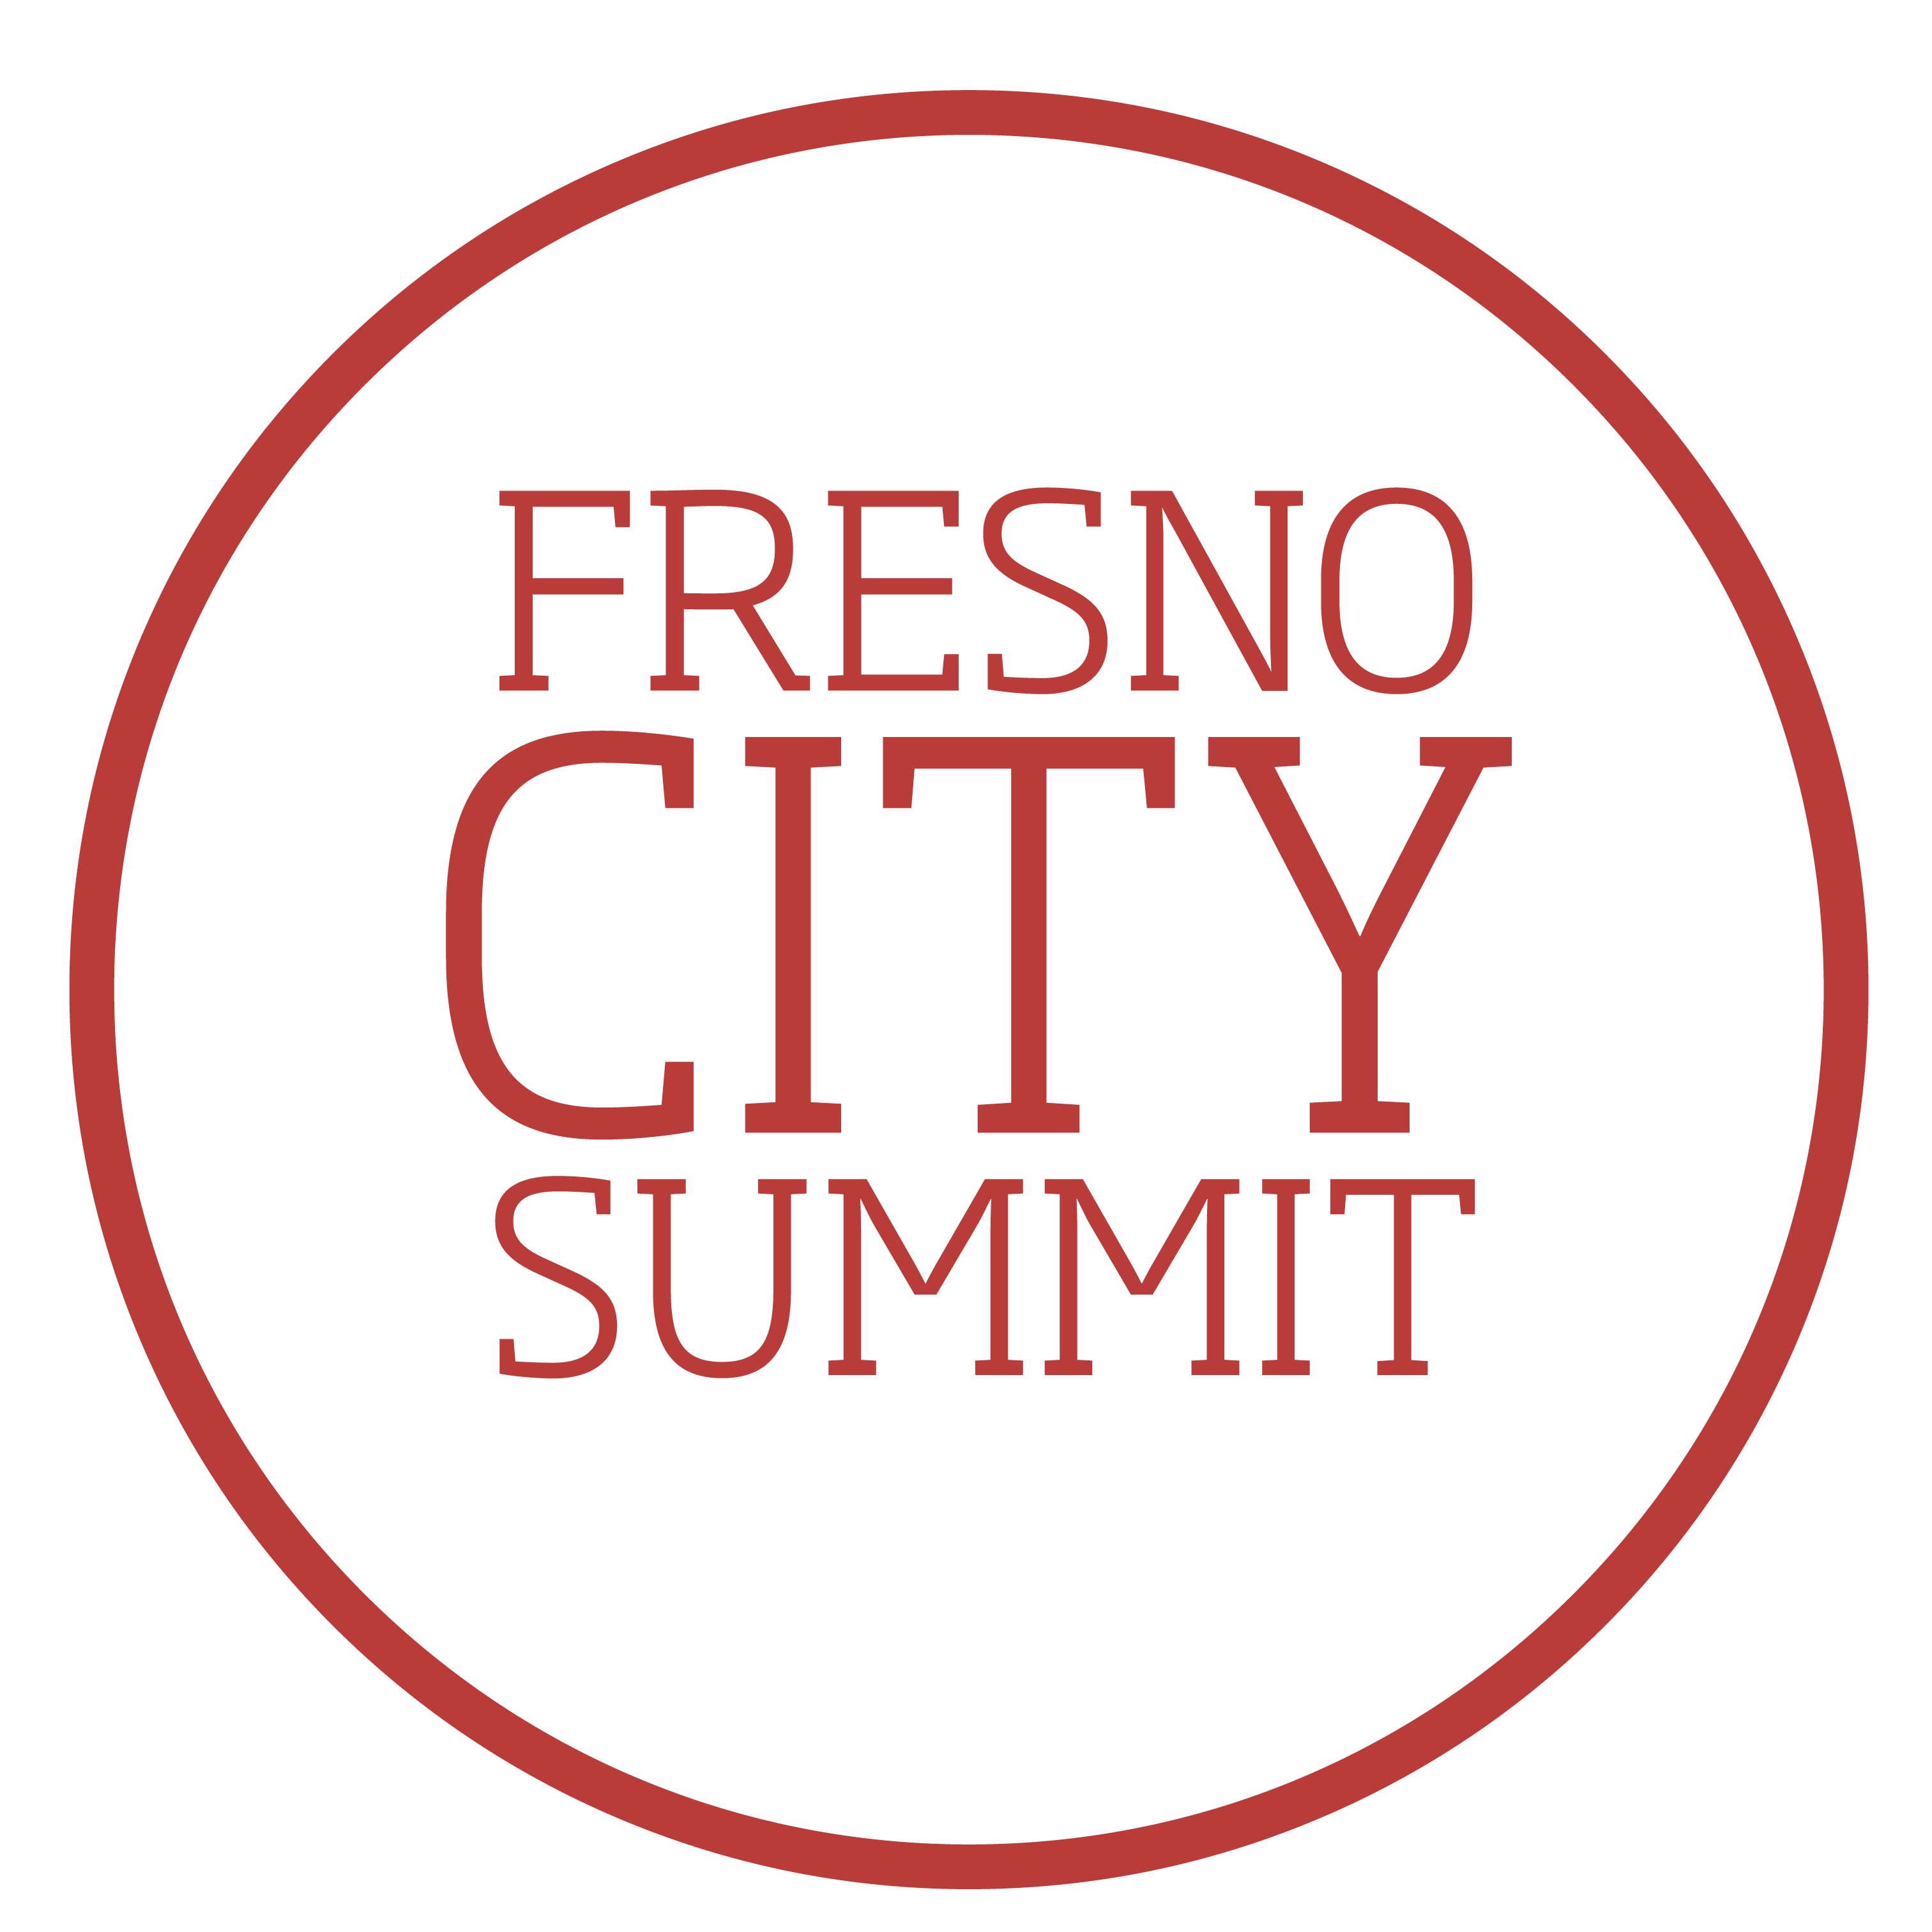 City Summit is a 2-day gathering to equip you to see yourself and your city in a new way.